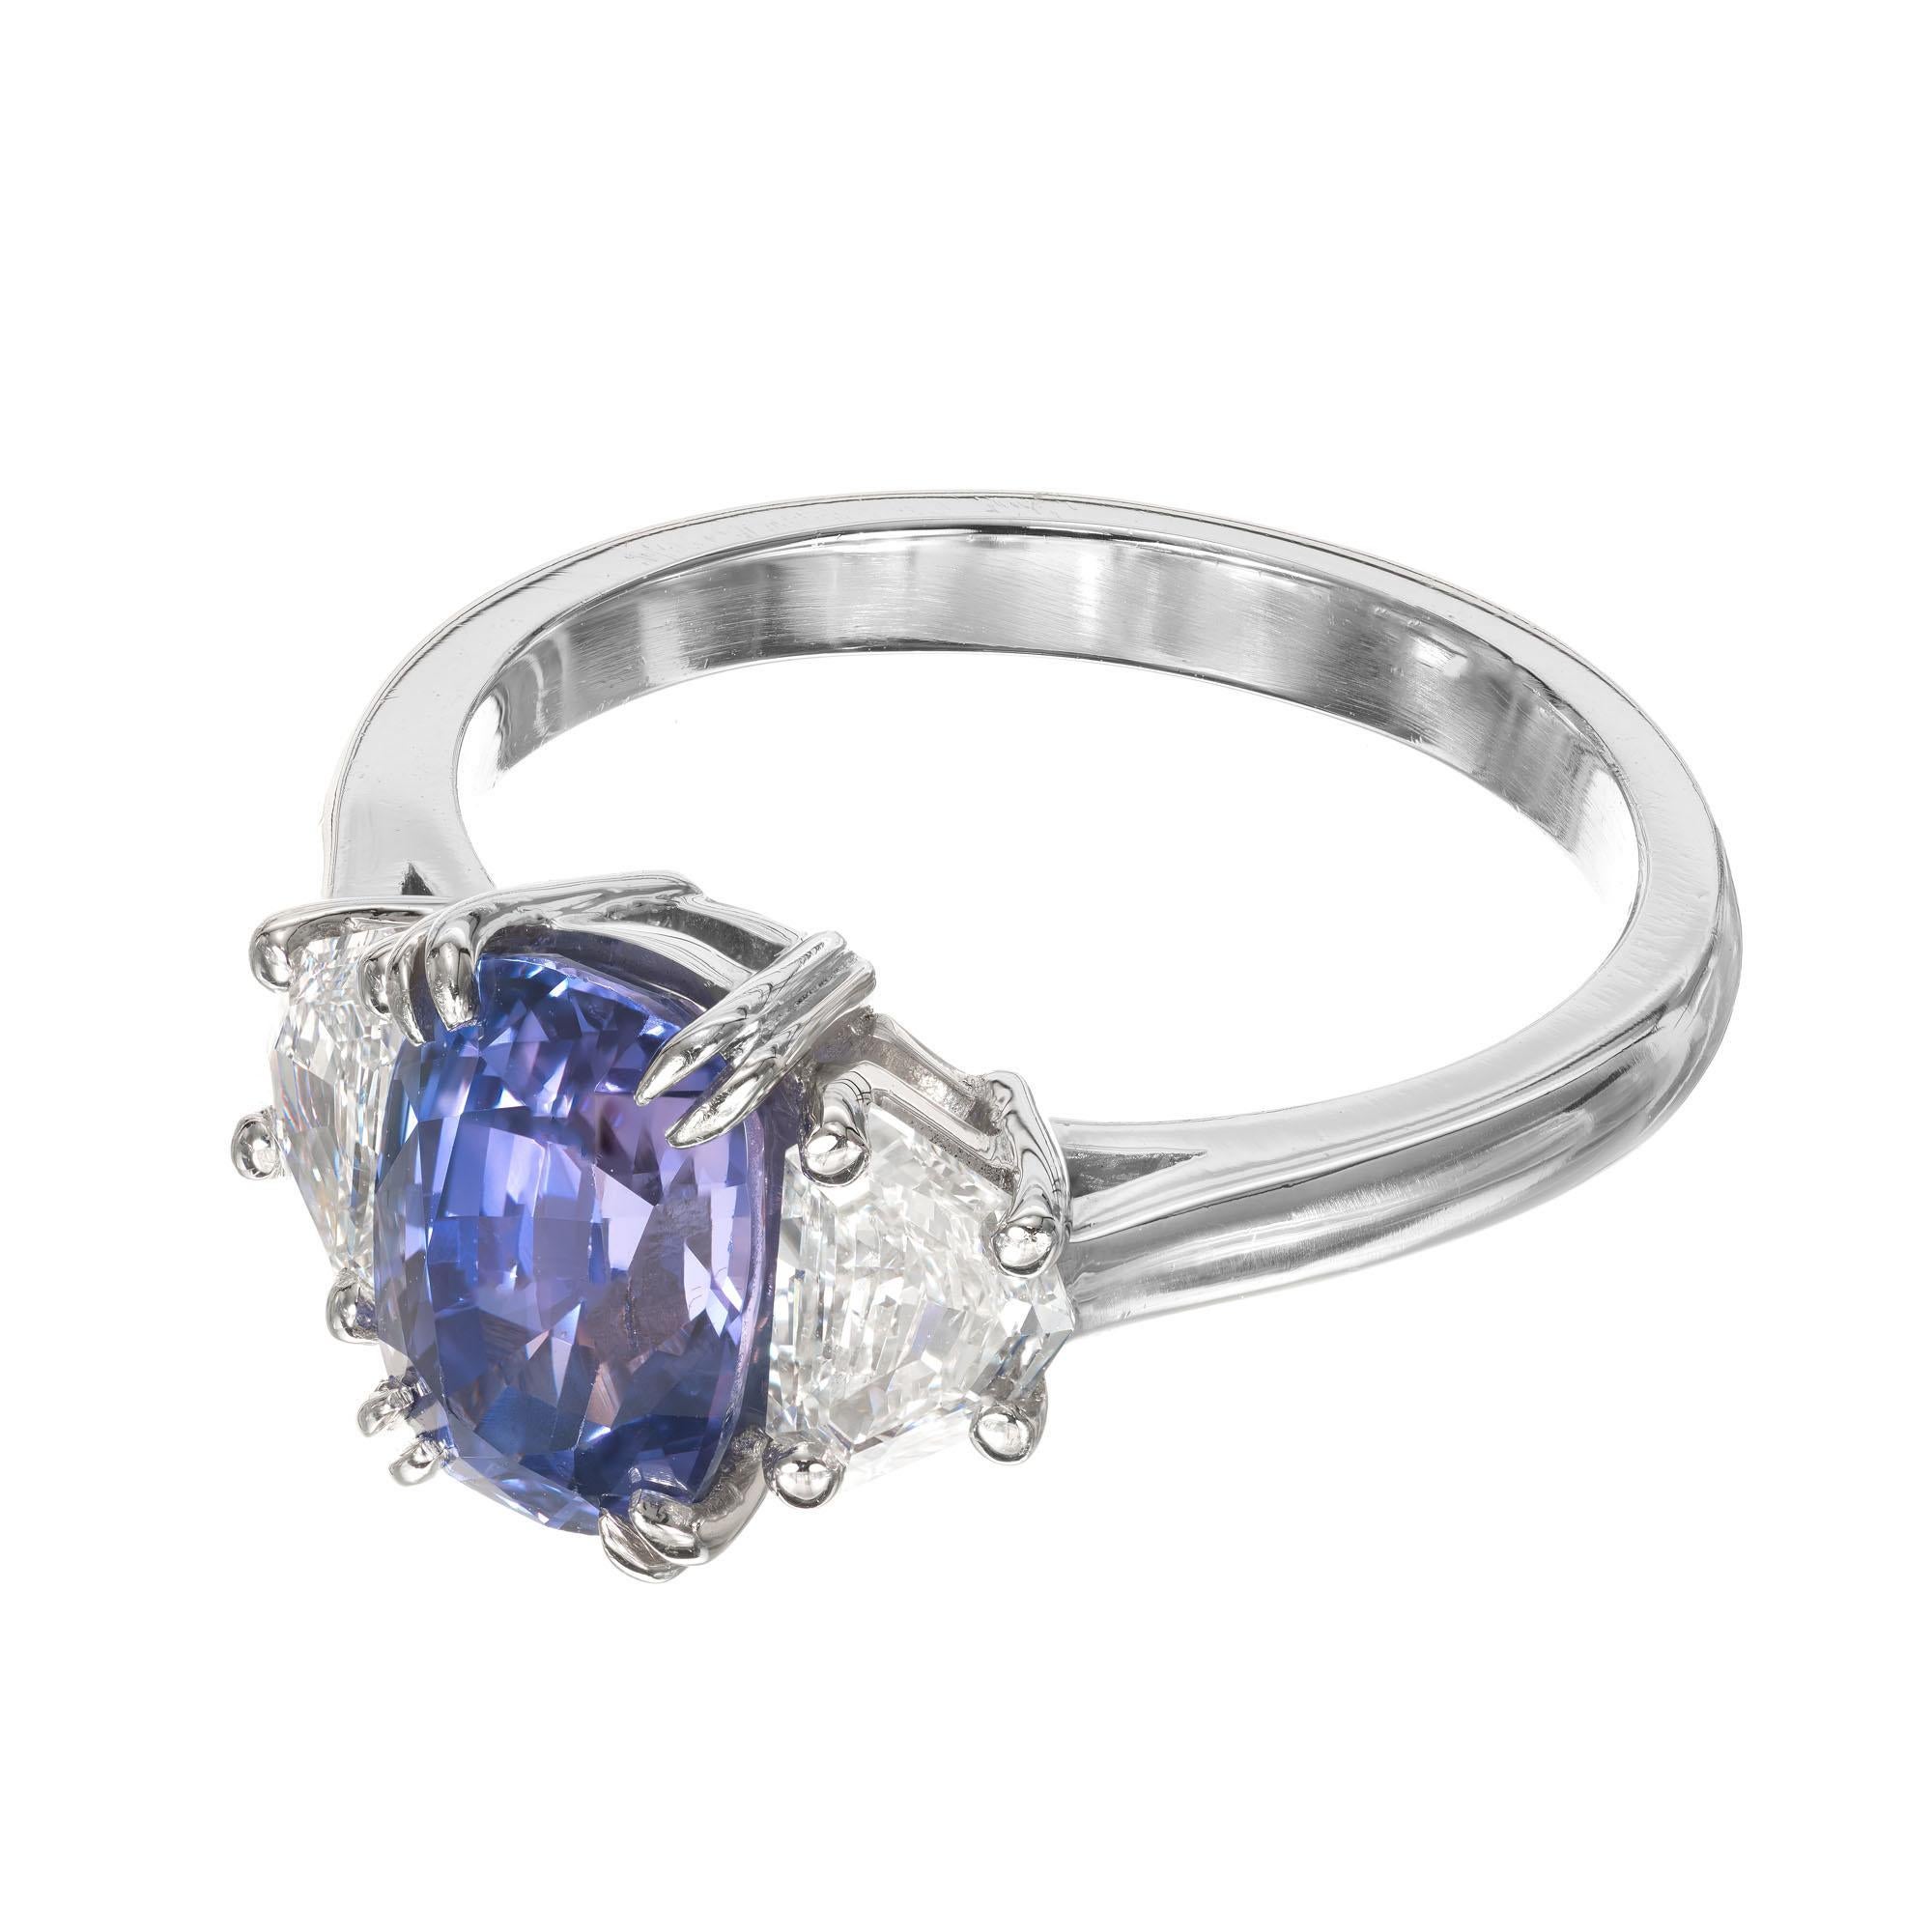 Peter Suchy GIA 3.07 Carat Sapphire Diamond Platinum Three-Stone Engagement Ring In New Condition For Sale In Stamford, CT